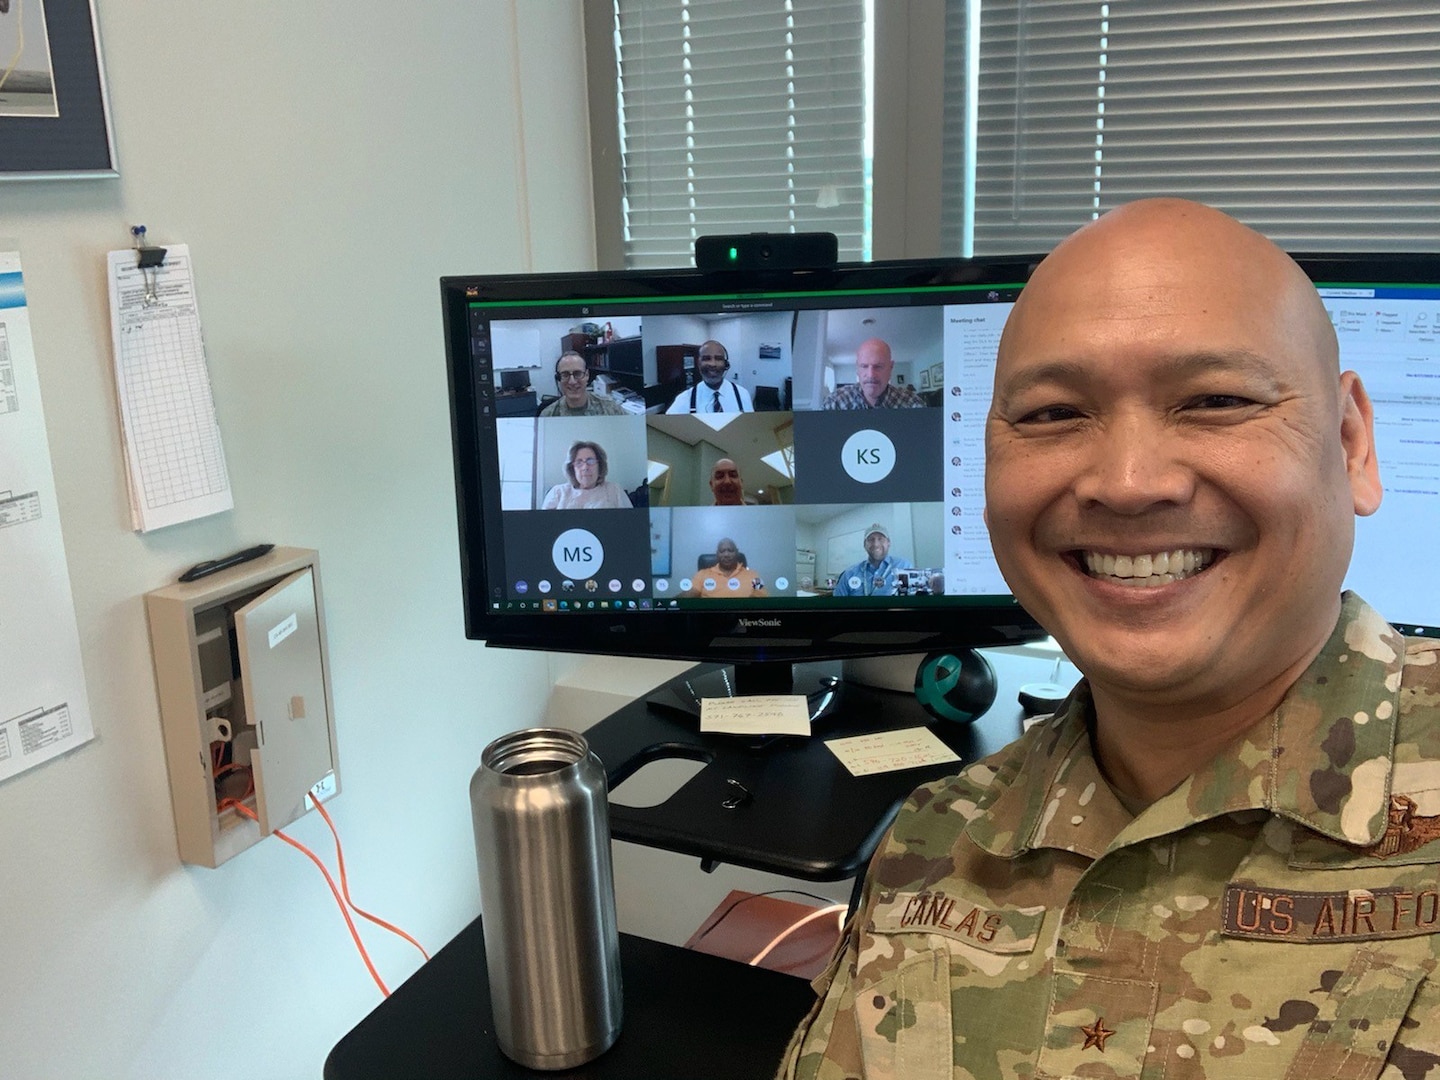 Air Force general officer takes selfie with computer screen